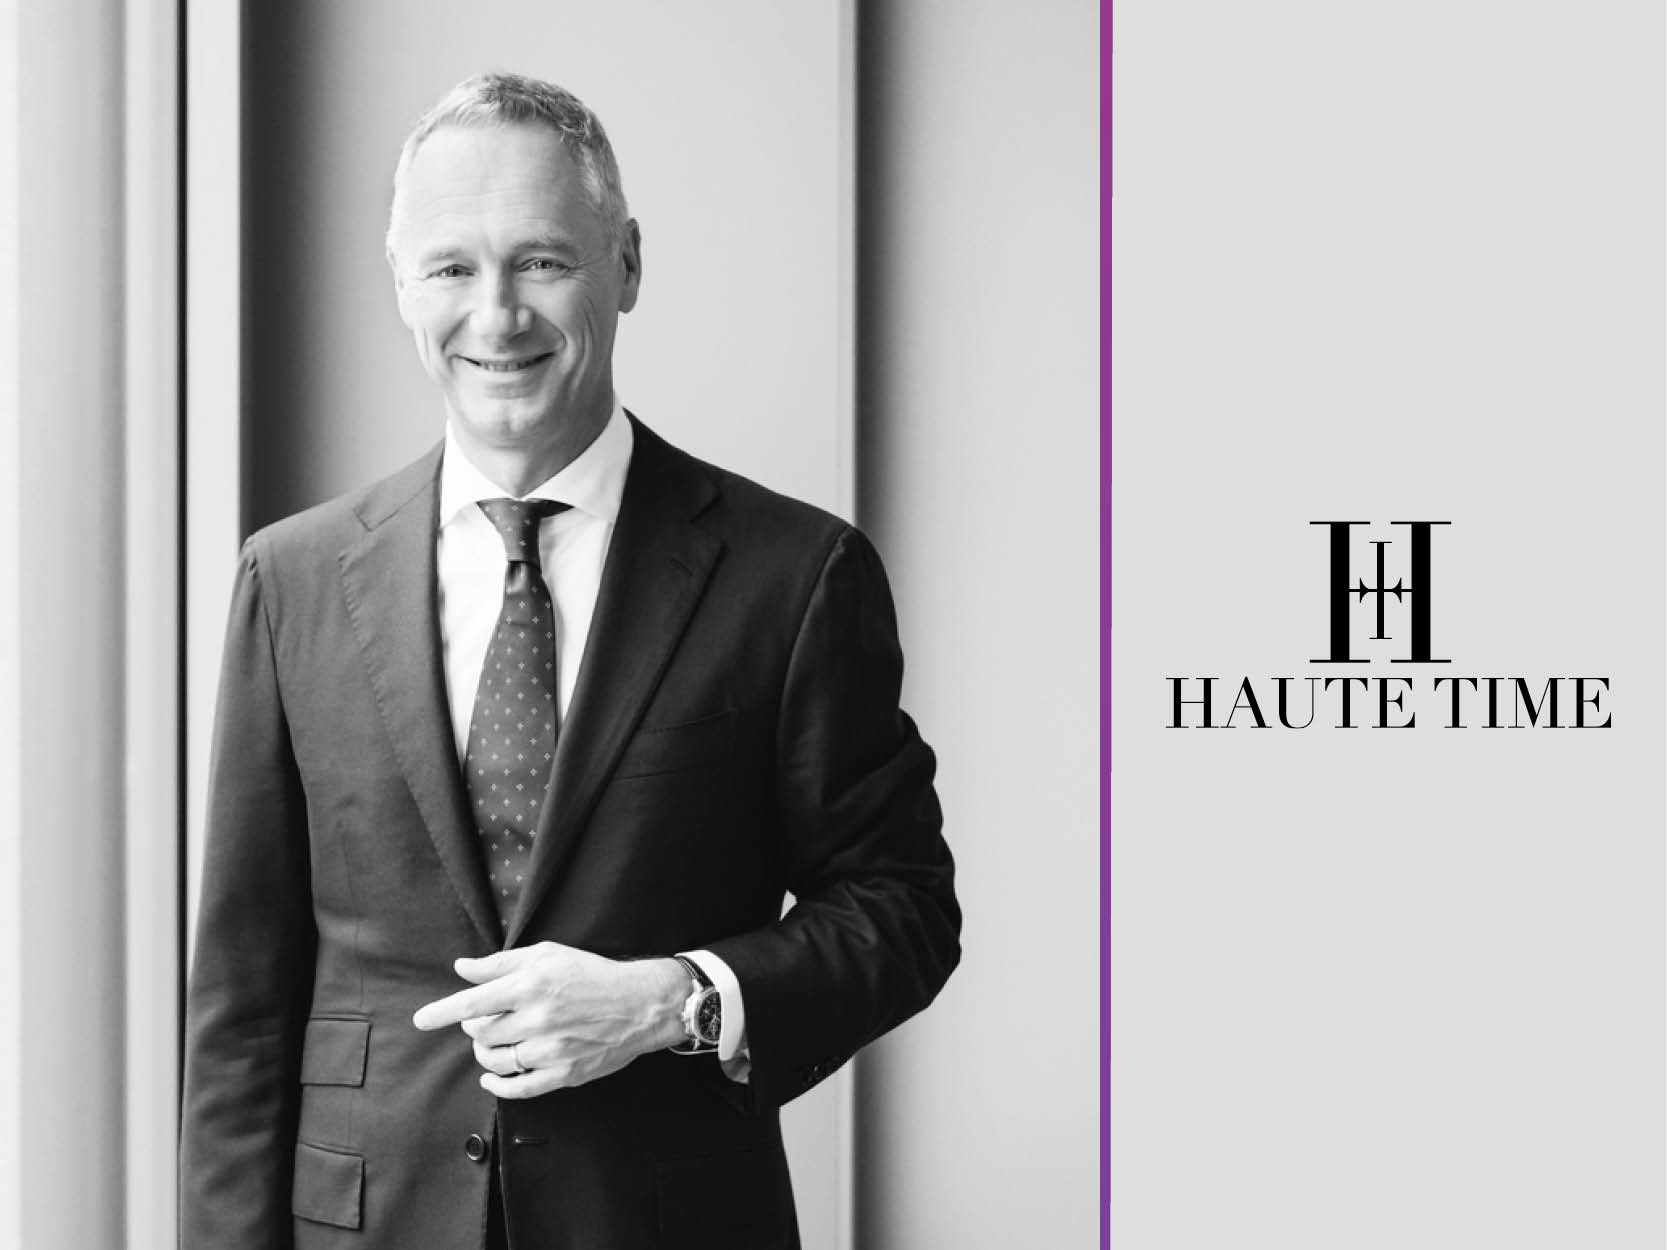 Watch: A. Lange & Söhne CEO Wilhelm Schmid Talks About New Releases And Digital Shift In Watch Industry